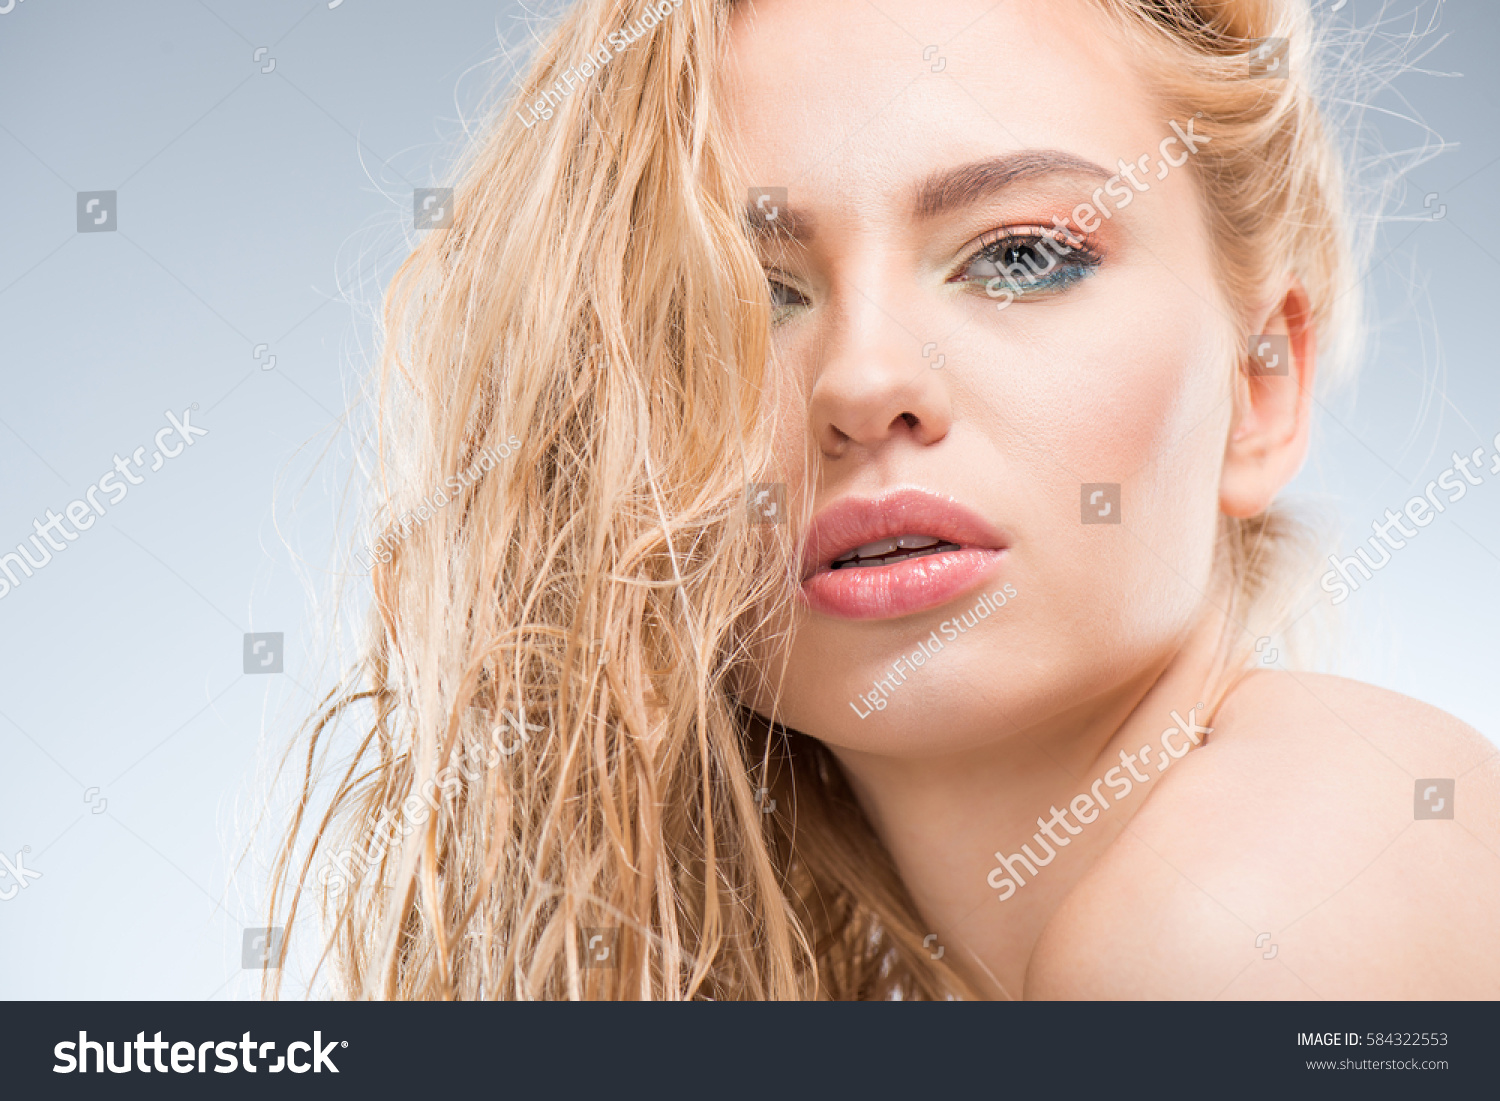 Portrait Sensual Naked Woman Makeup Looking Stock Photo Shutterstock